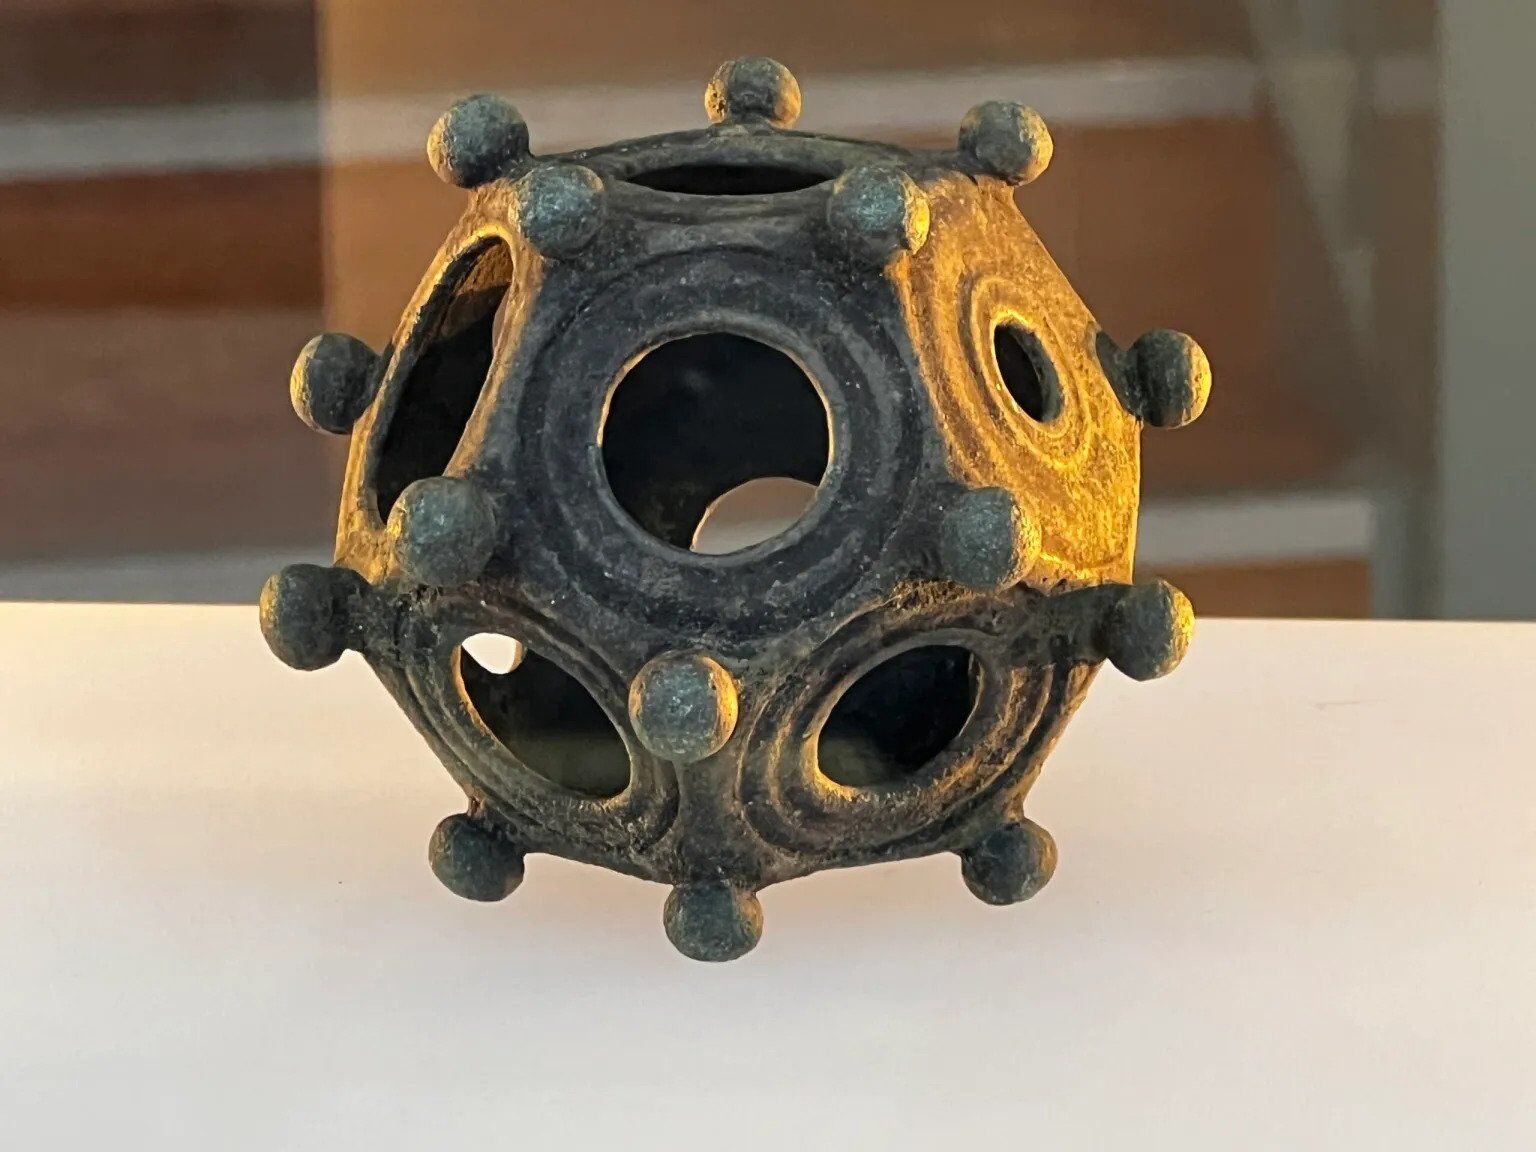 A rare Roman dodecahedron found in England has puzzled archaeologists. Photo